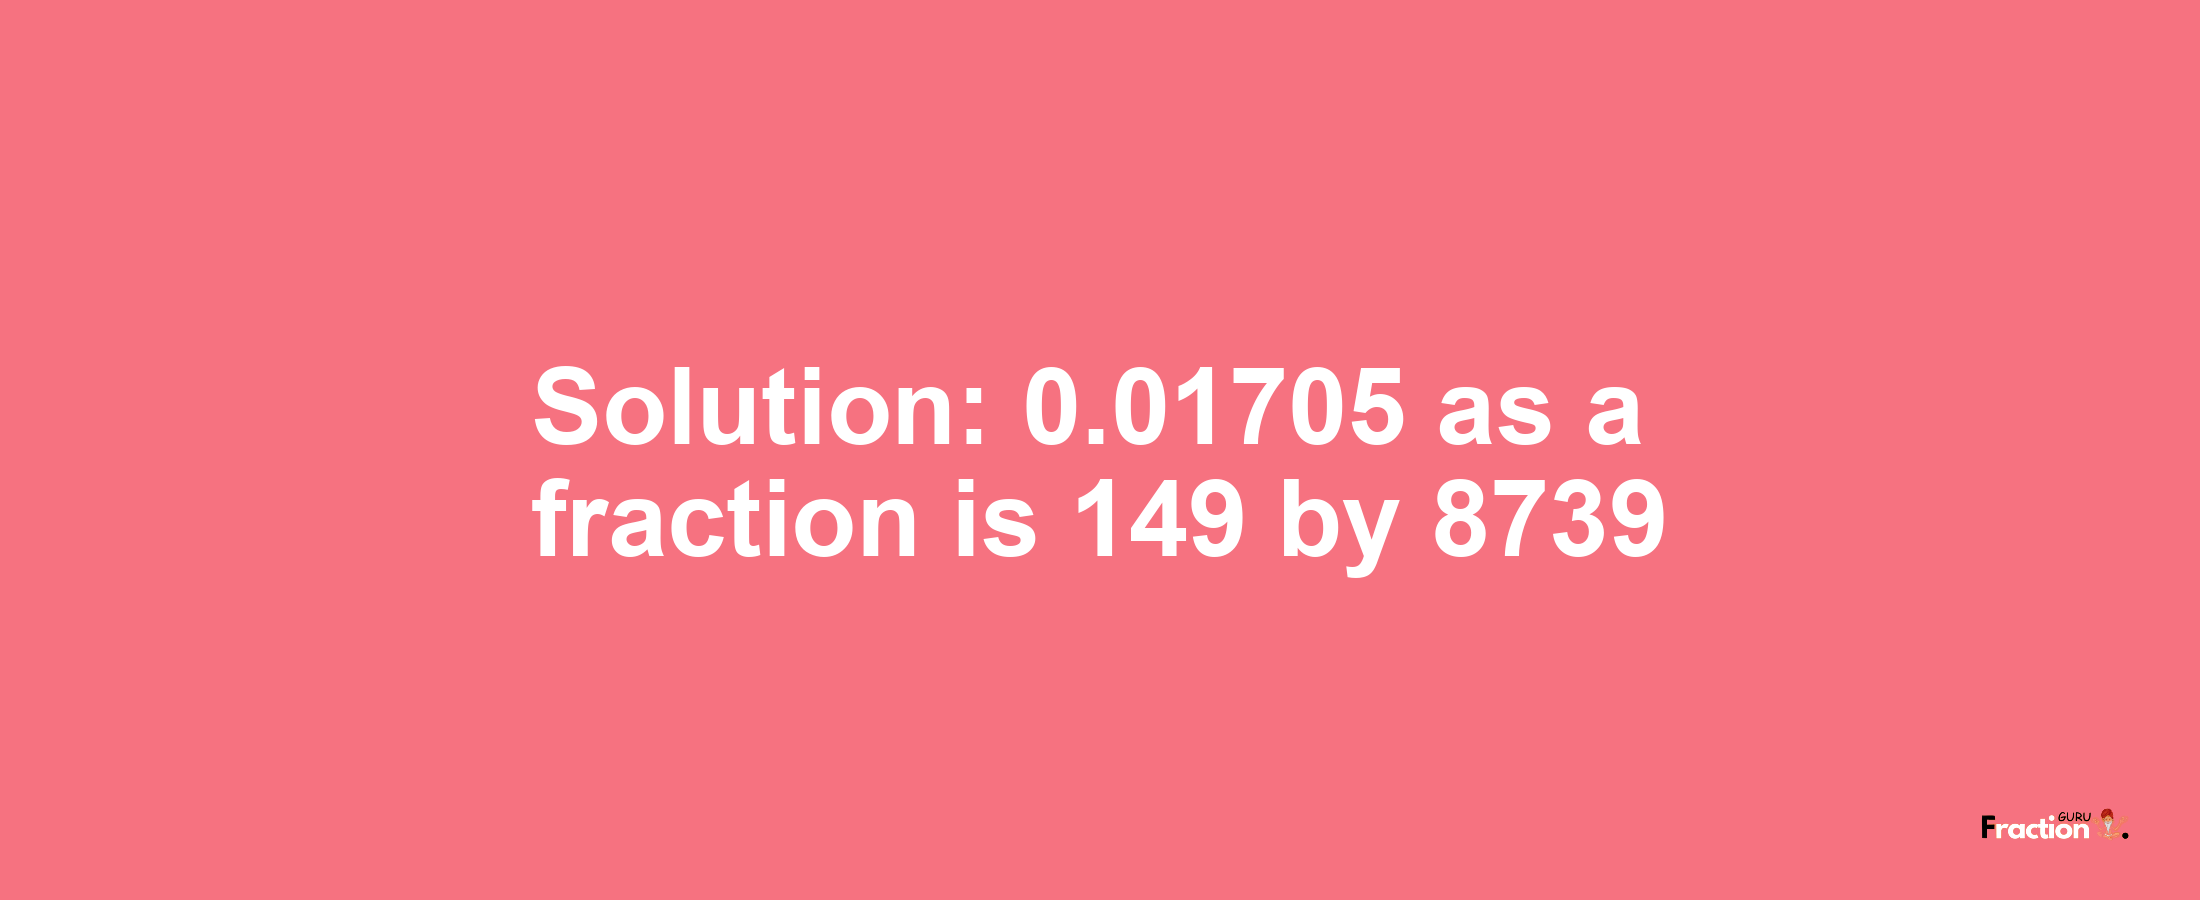 Solution:0.01705 as a fraction is 149/8739